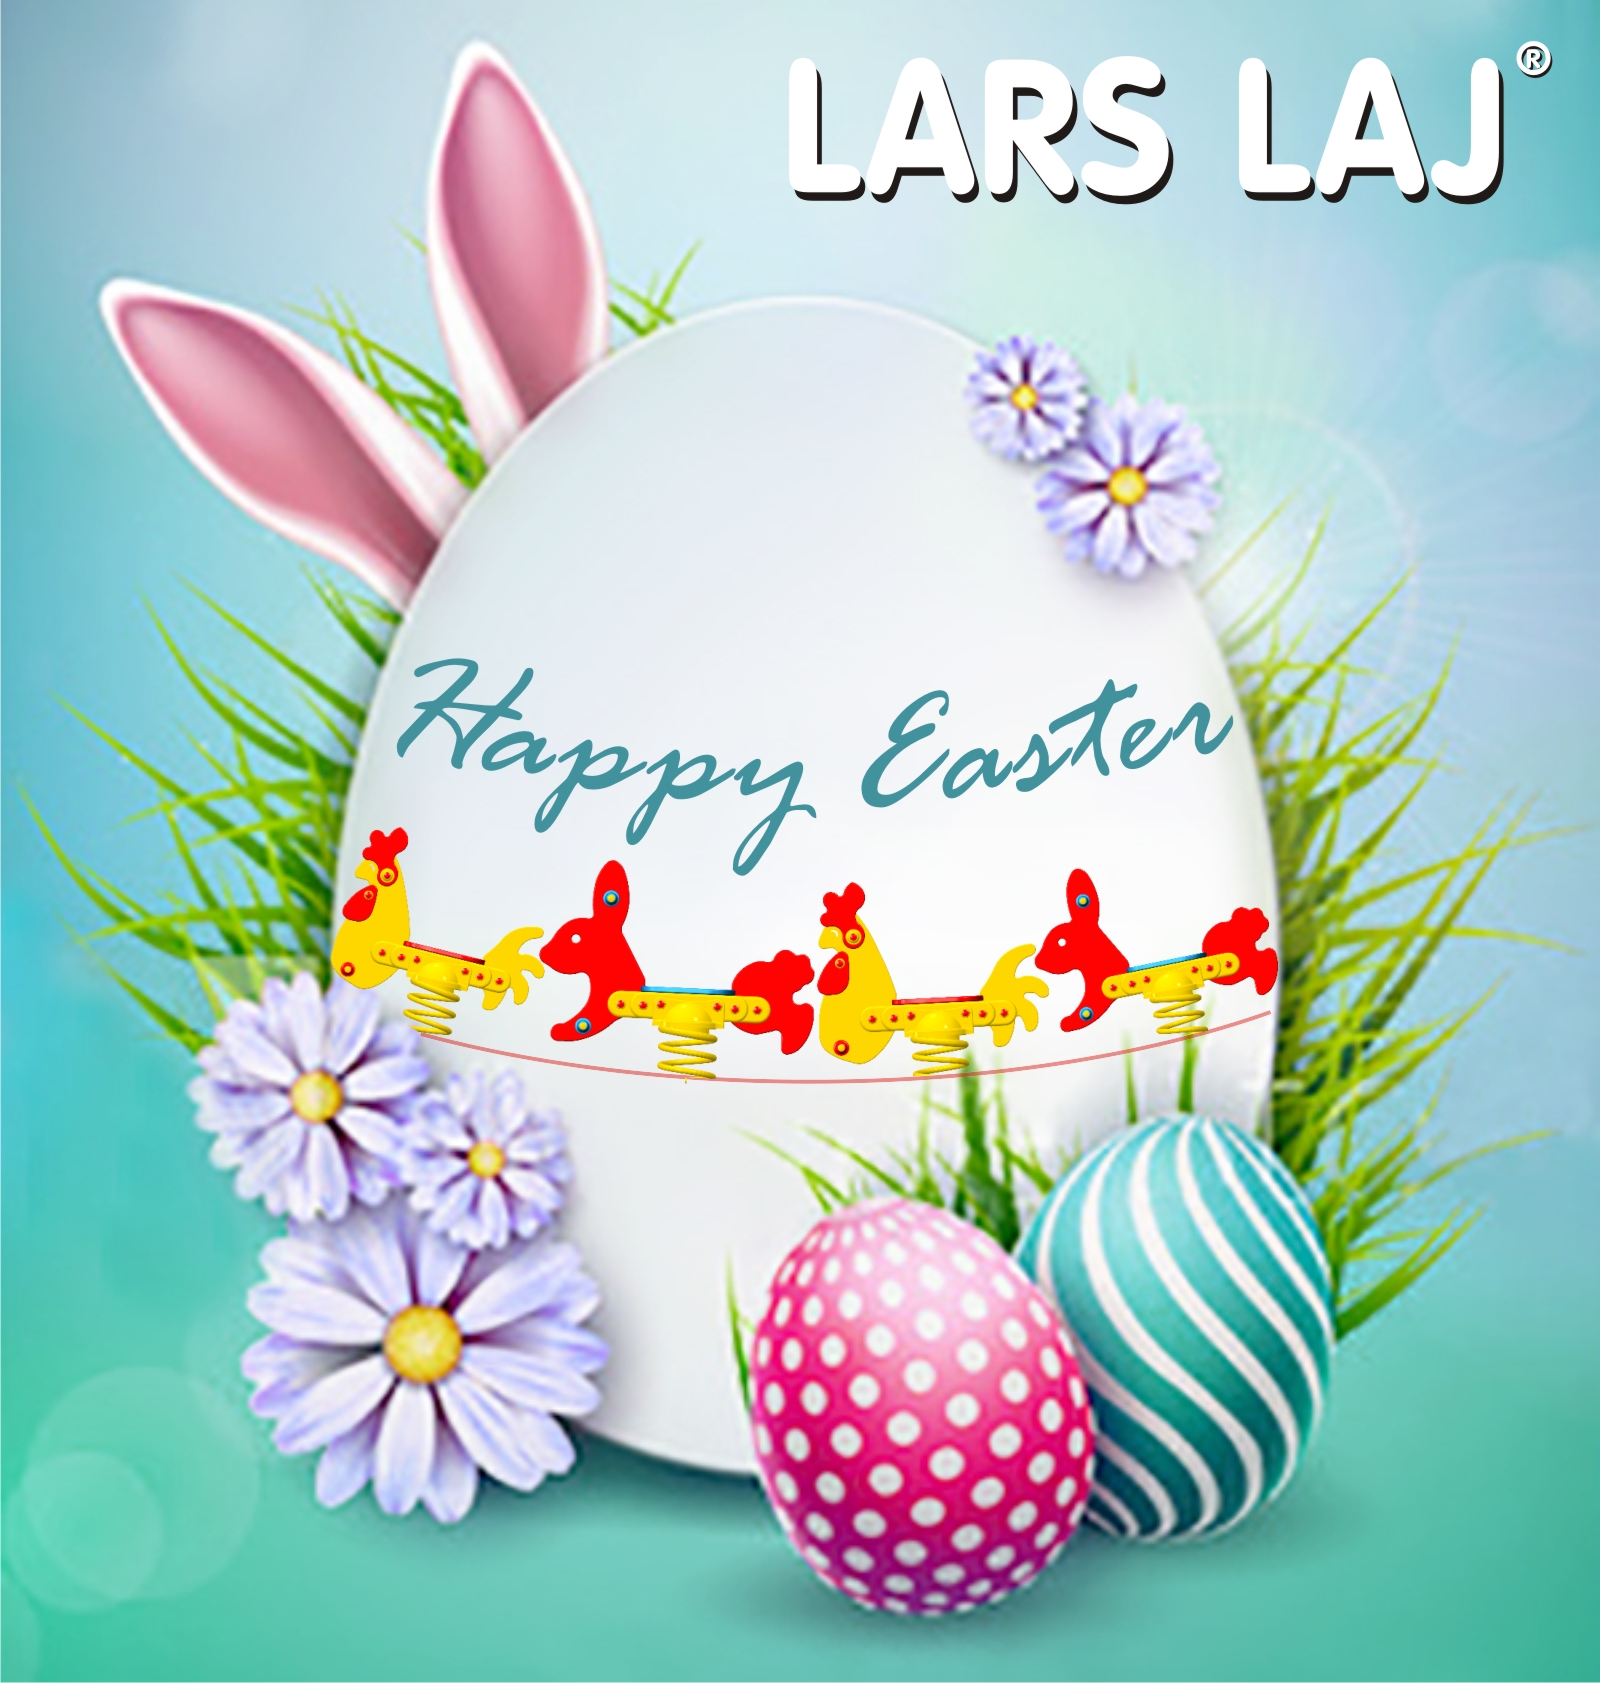 Lars Laj wishes you Happy Easter